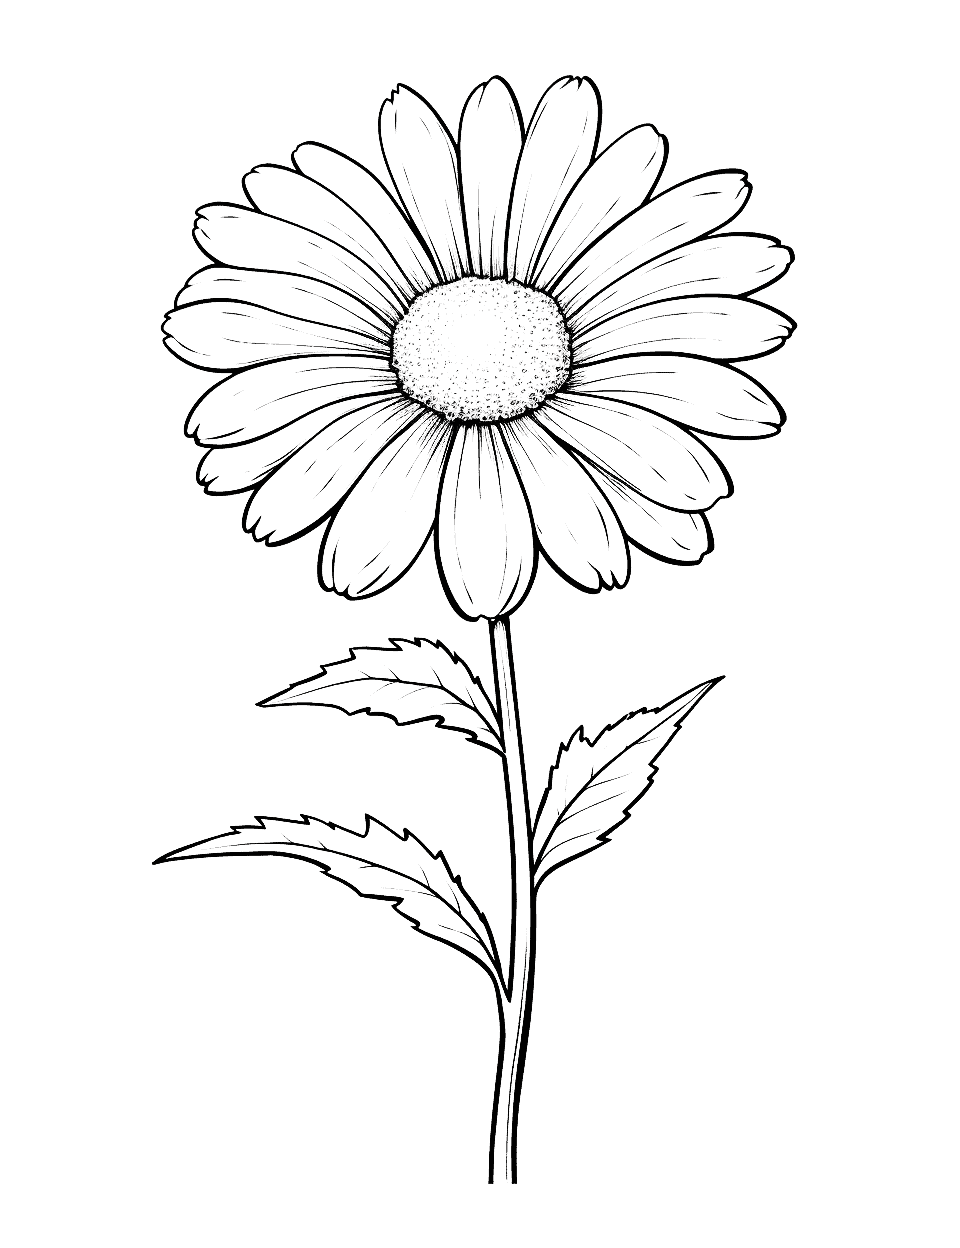 Beautiful Daisy Drawing Flower Coloring Page - A detailed drawing of a beautiful daisy.